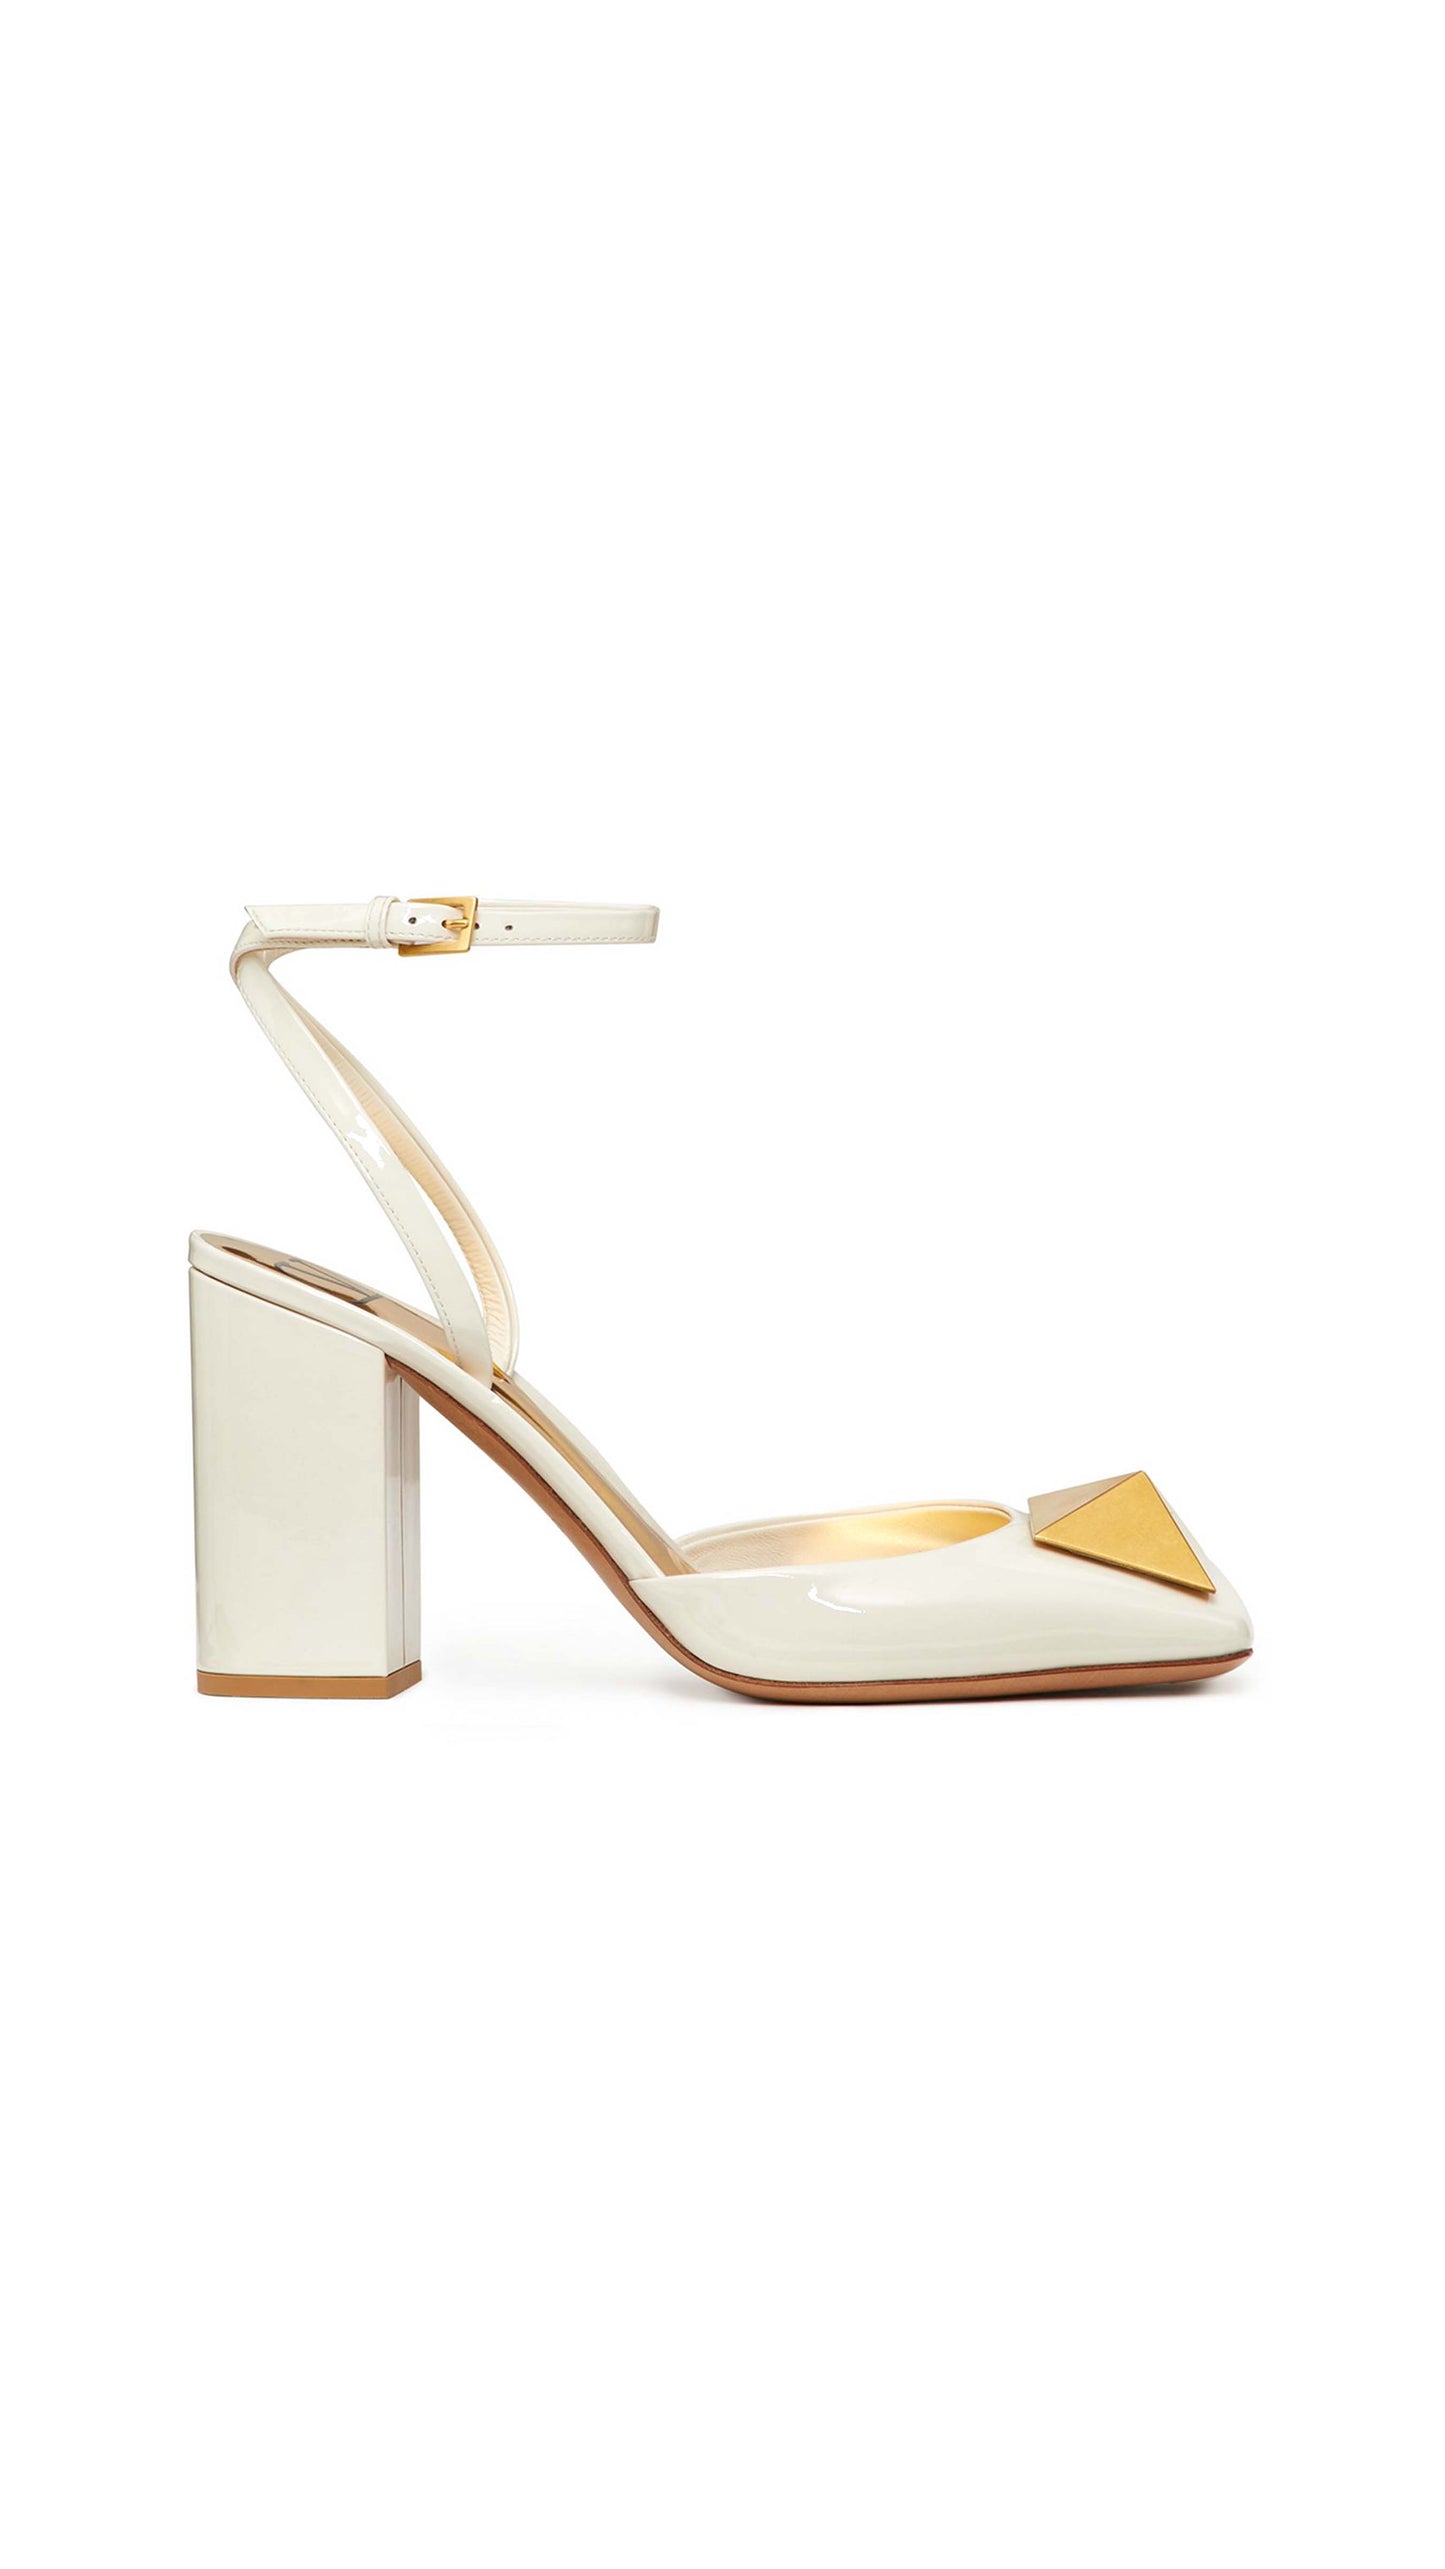 One Stud Pump in Patent Leather 90mm - Light Ivory